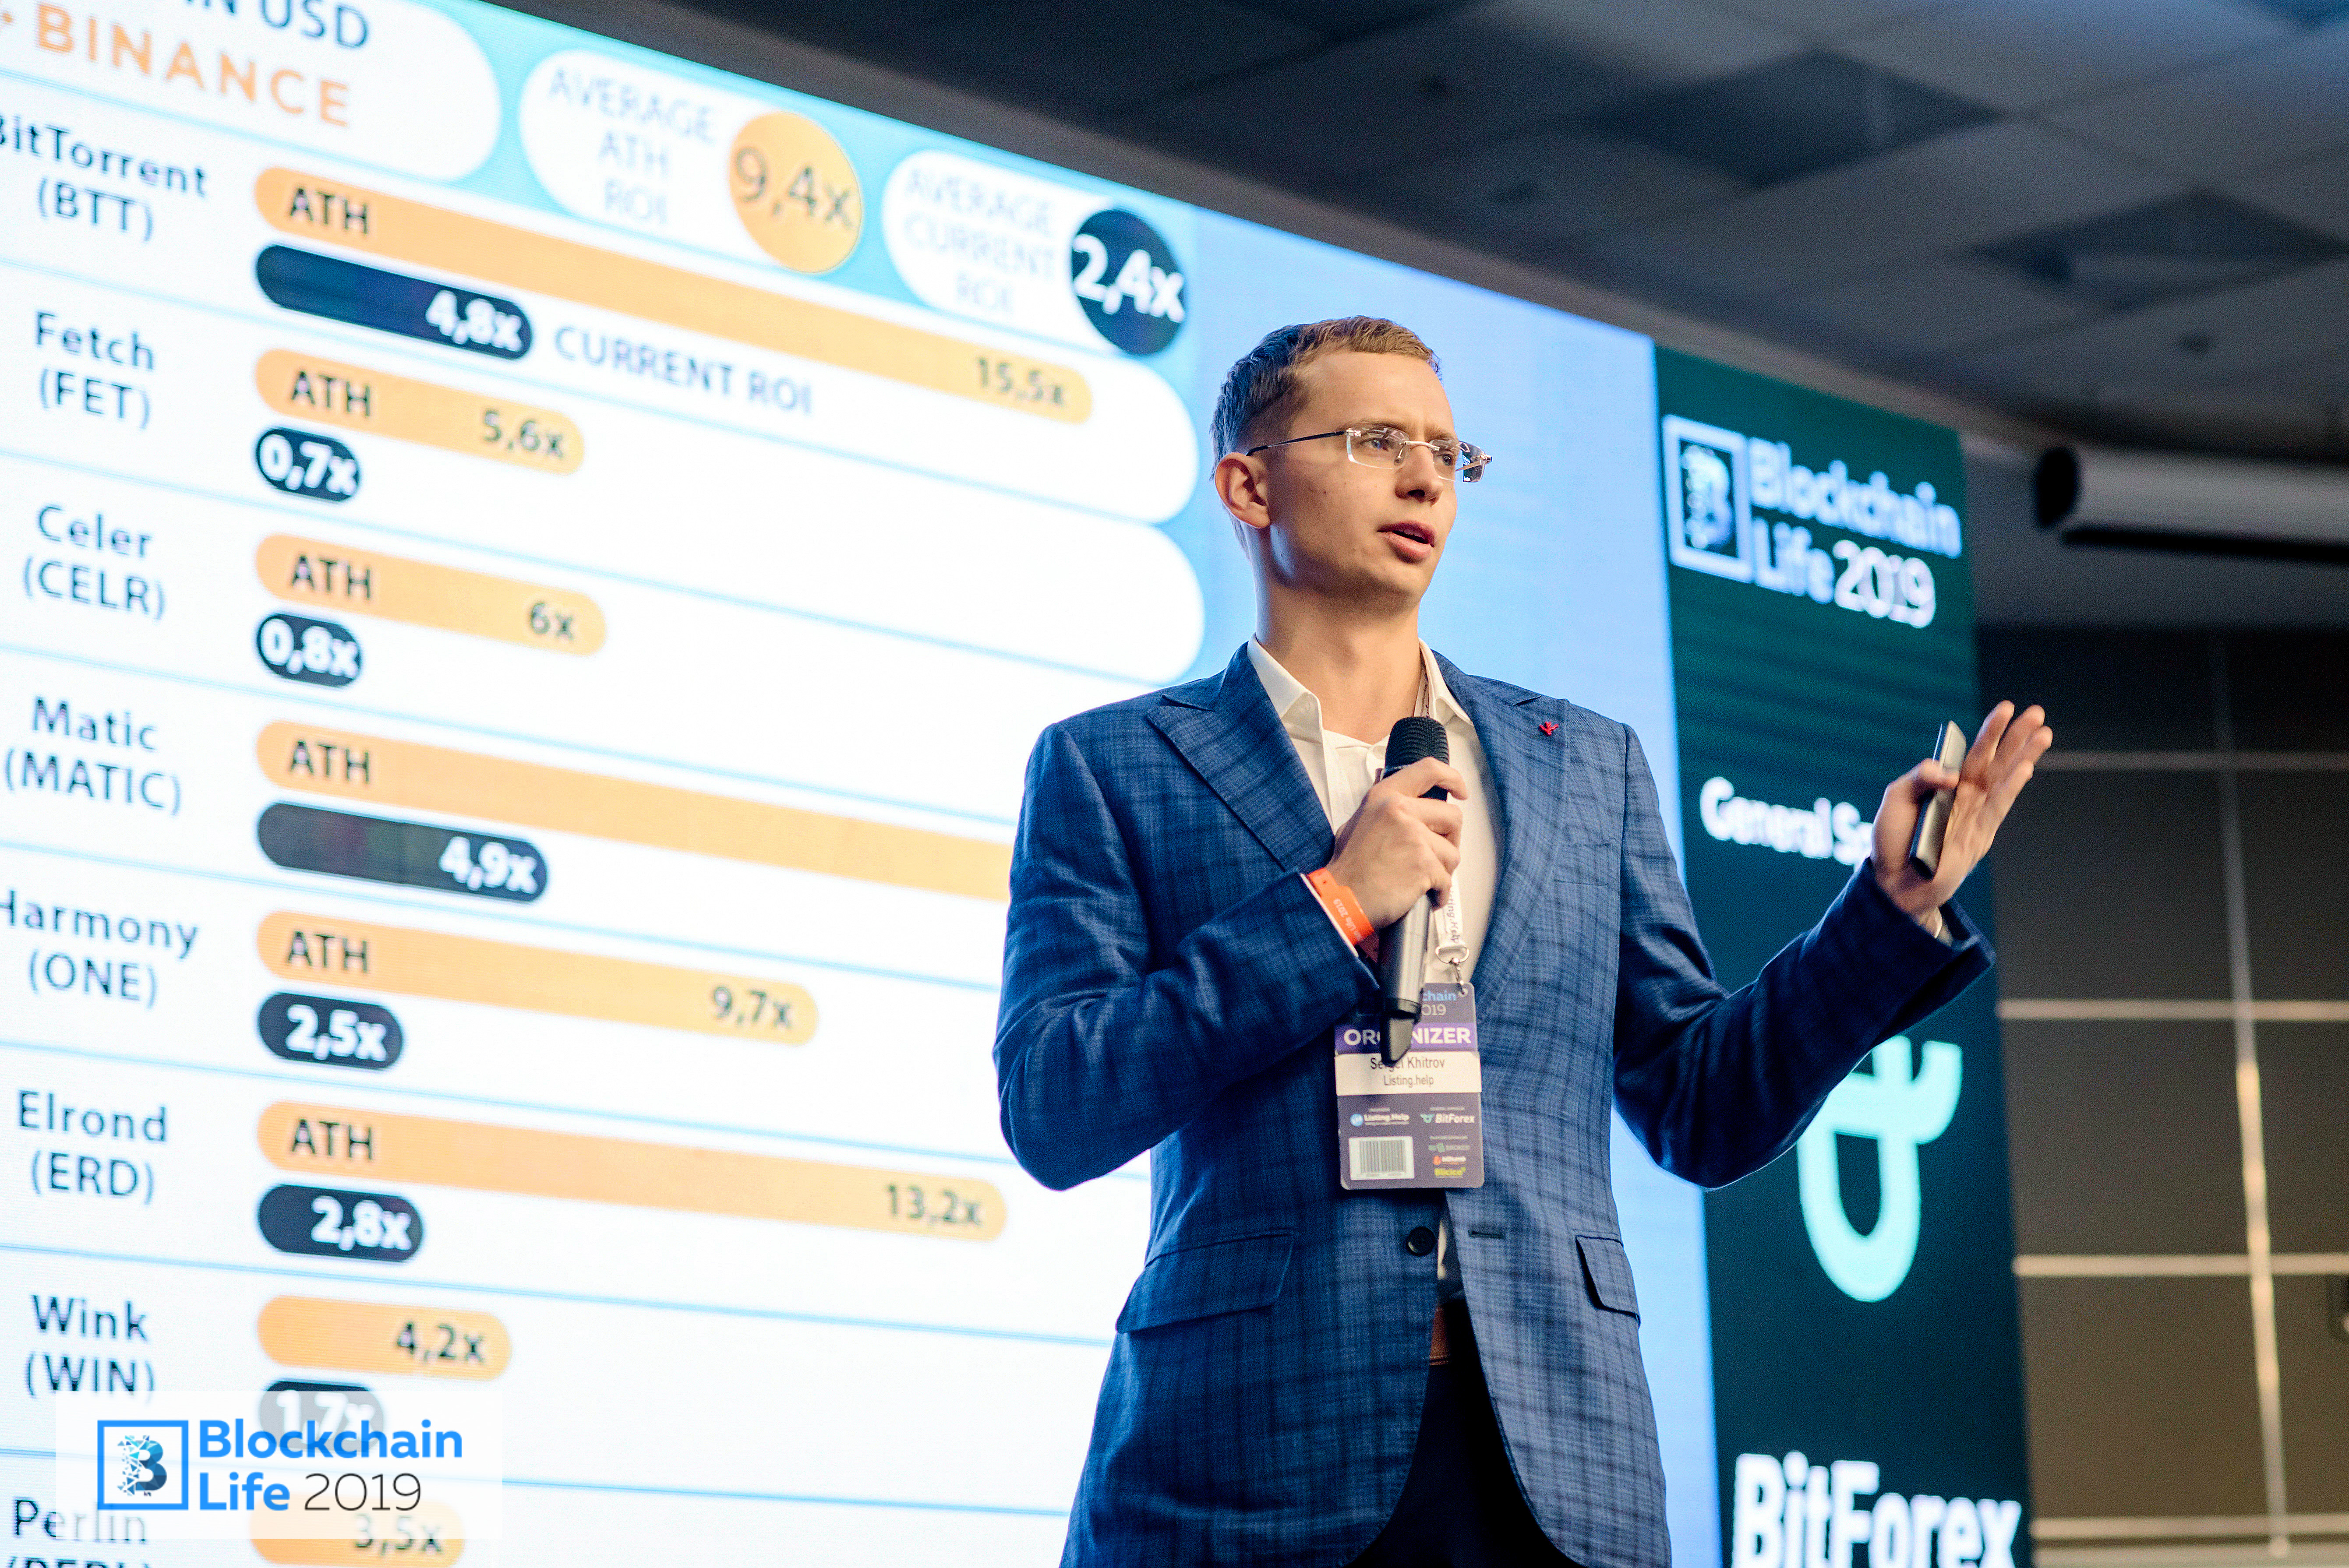 Blockchain Life 2019 was successfully held in Moscow